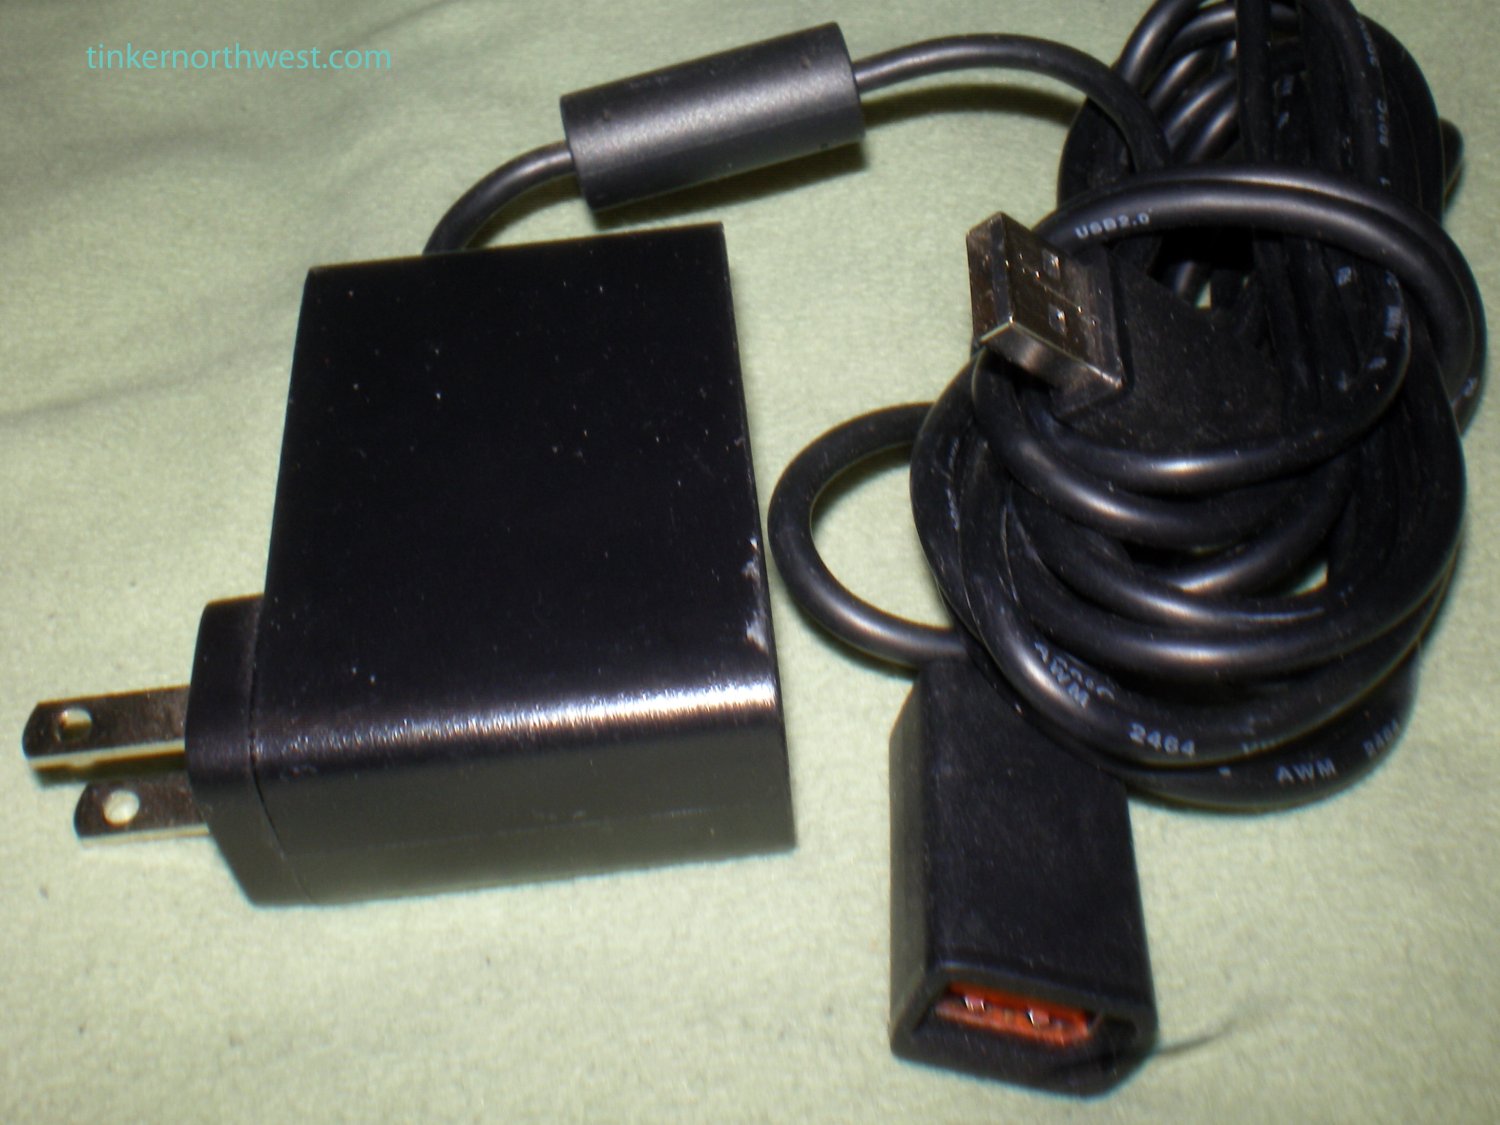 kinect adapter for old xbox 360 to mac